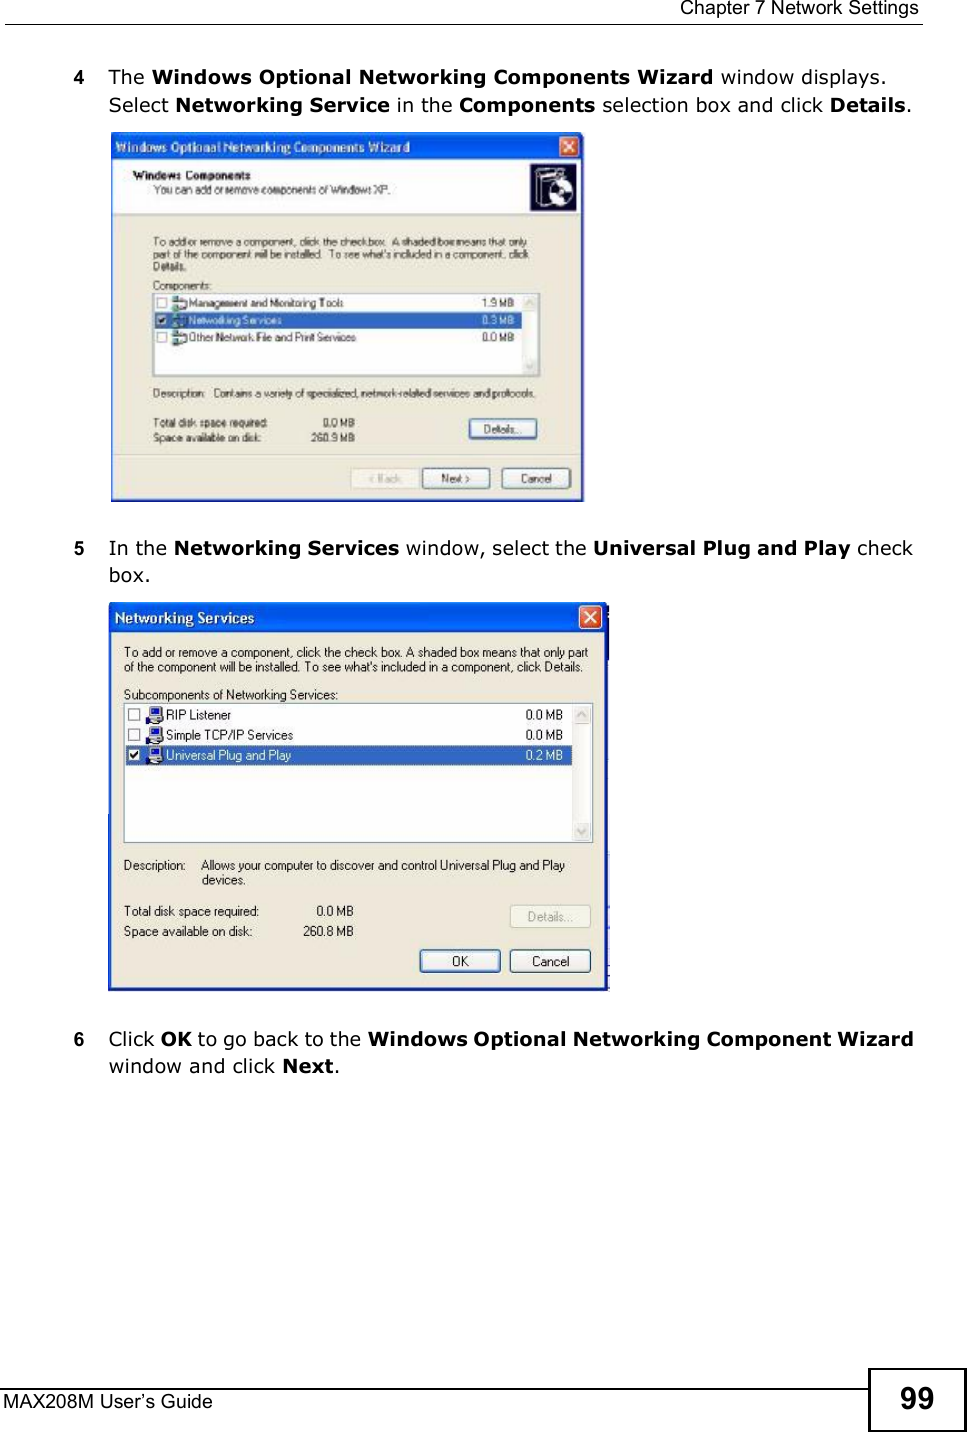  Chapter 7Network SettingsMAX208M User s Guide 994The Windows Optional Networking Components Wizard window displays. Select Networking Service in the Components selection box and click Details. 5In the Networking Services window, select the Universal Plug and Play check box. 6Click OK to go back to the Windows Optional Networking Component Wizard window and click Next. 